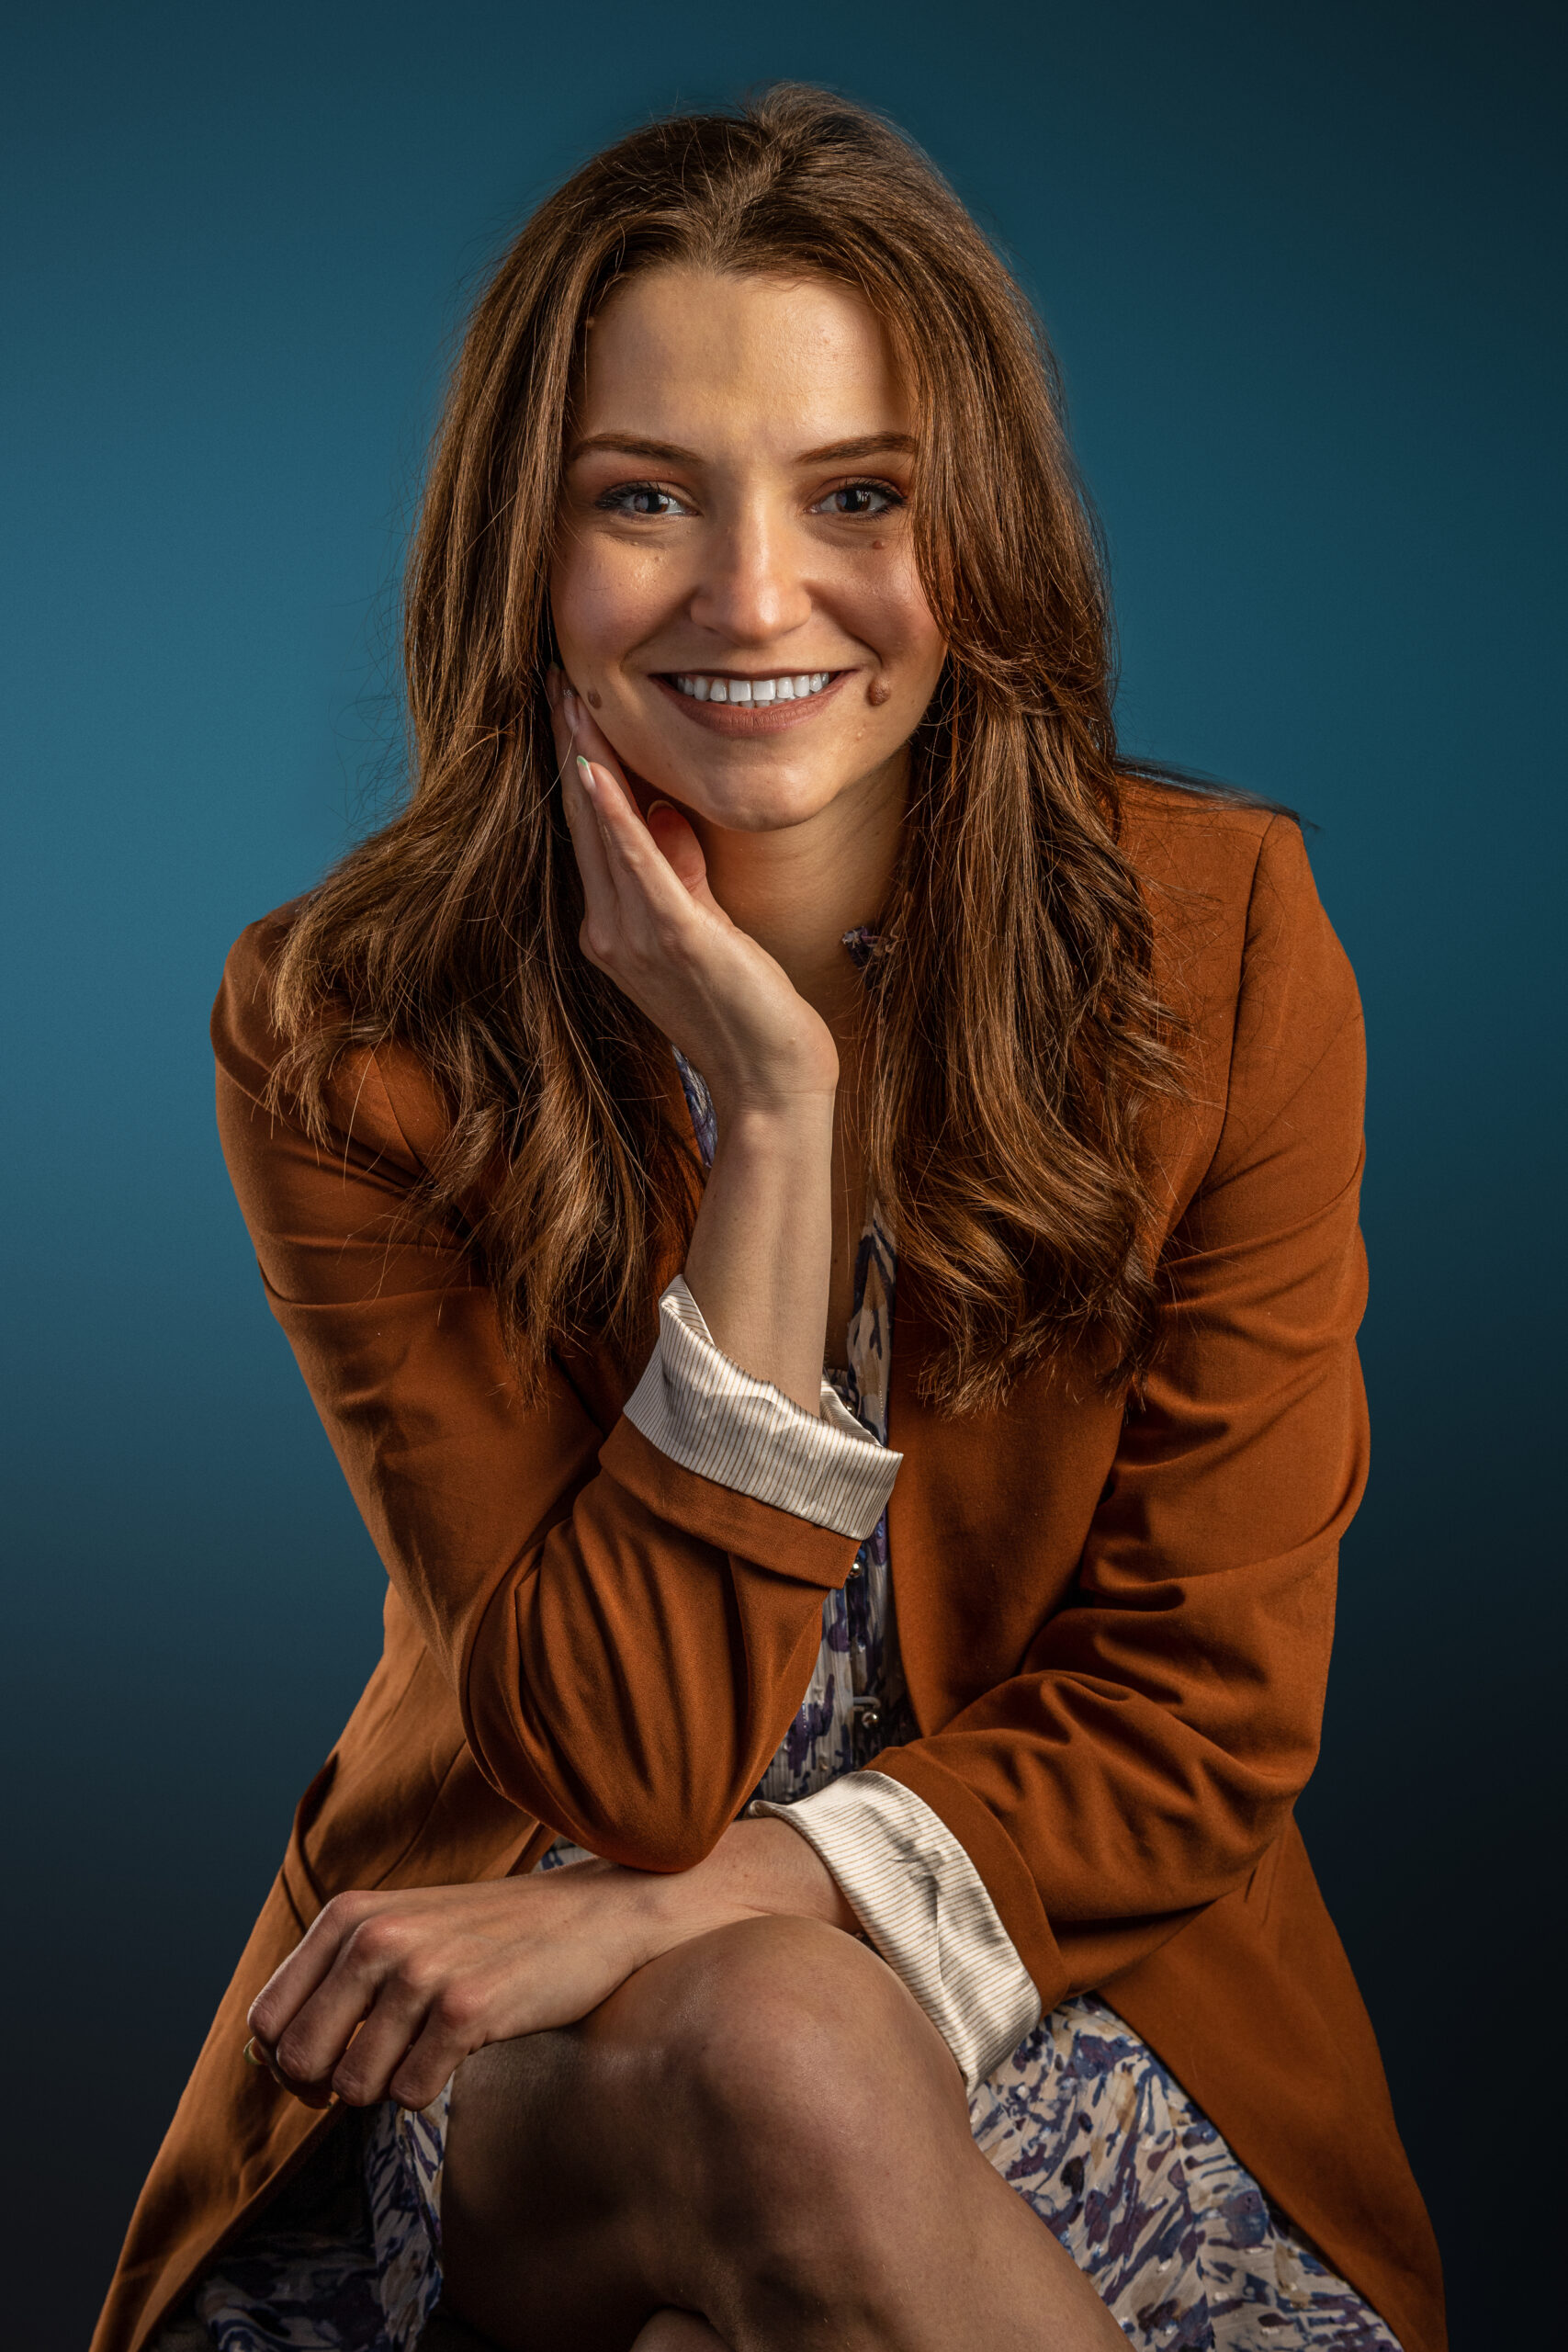 Brunette woman professional in rust colored jacket sitting cross legged with elbow on knee and hand on side of face in front of teal background.